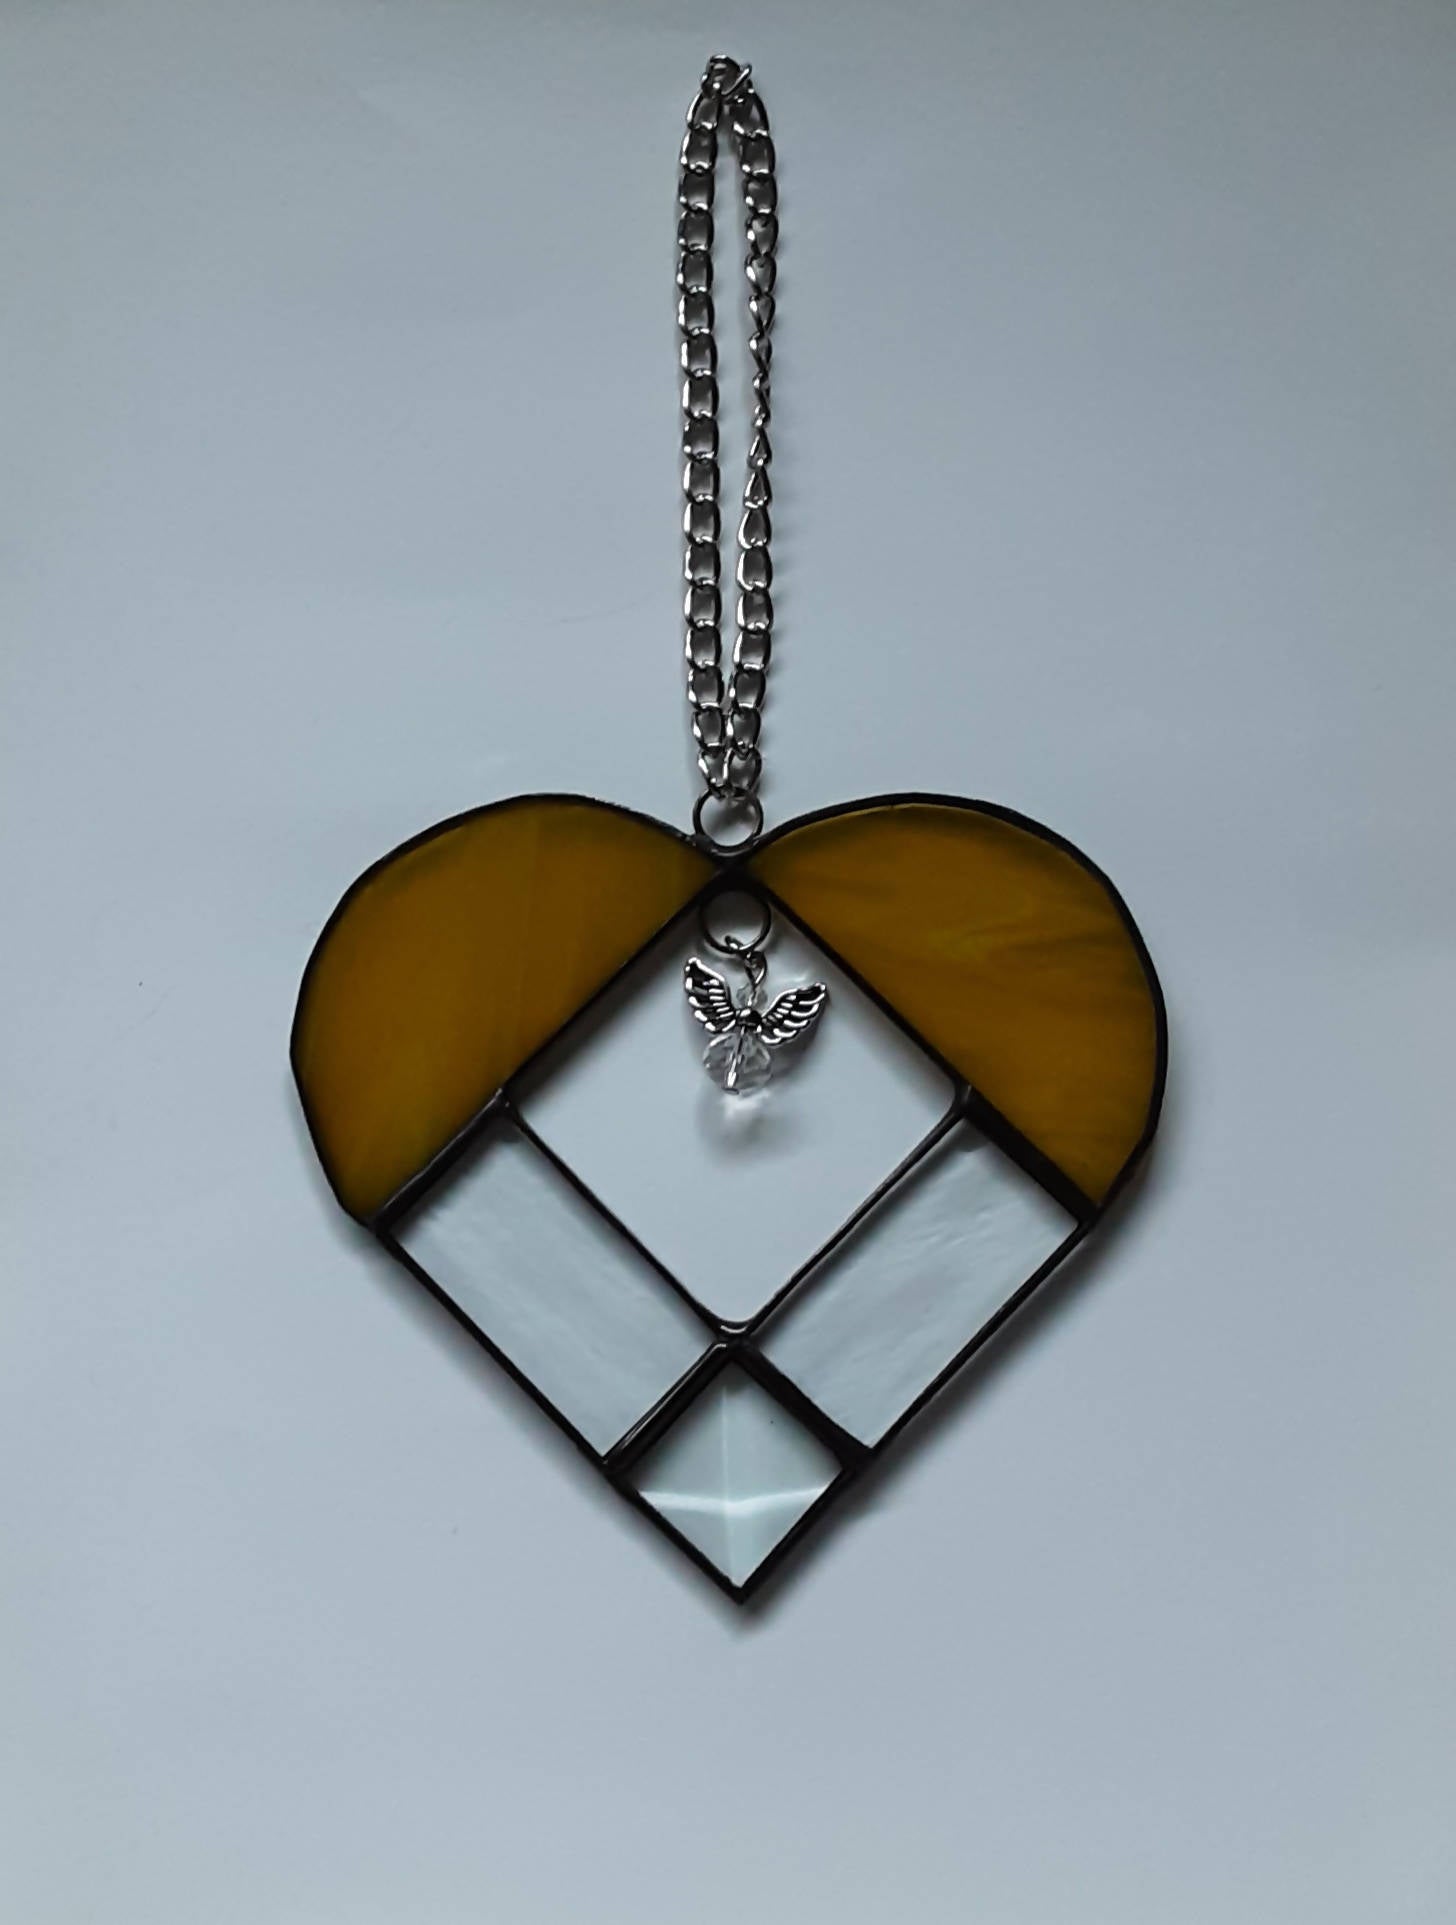 Stained glass large heart - Yellow